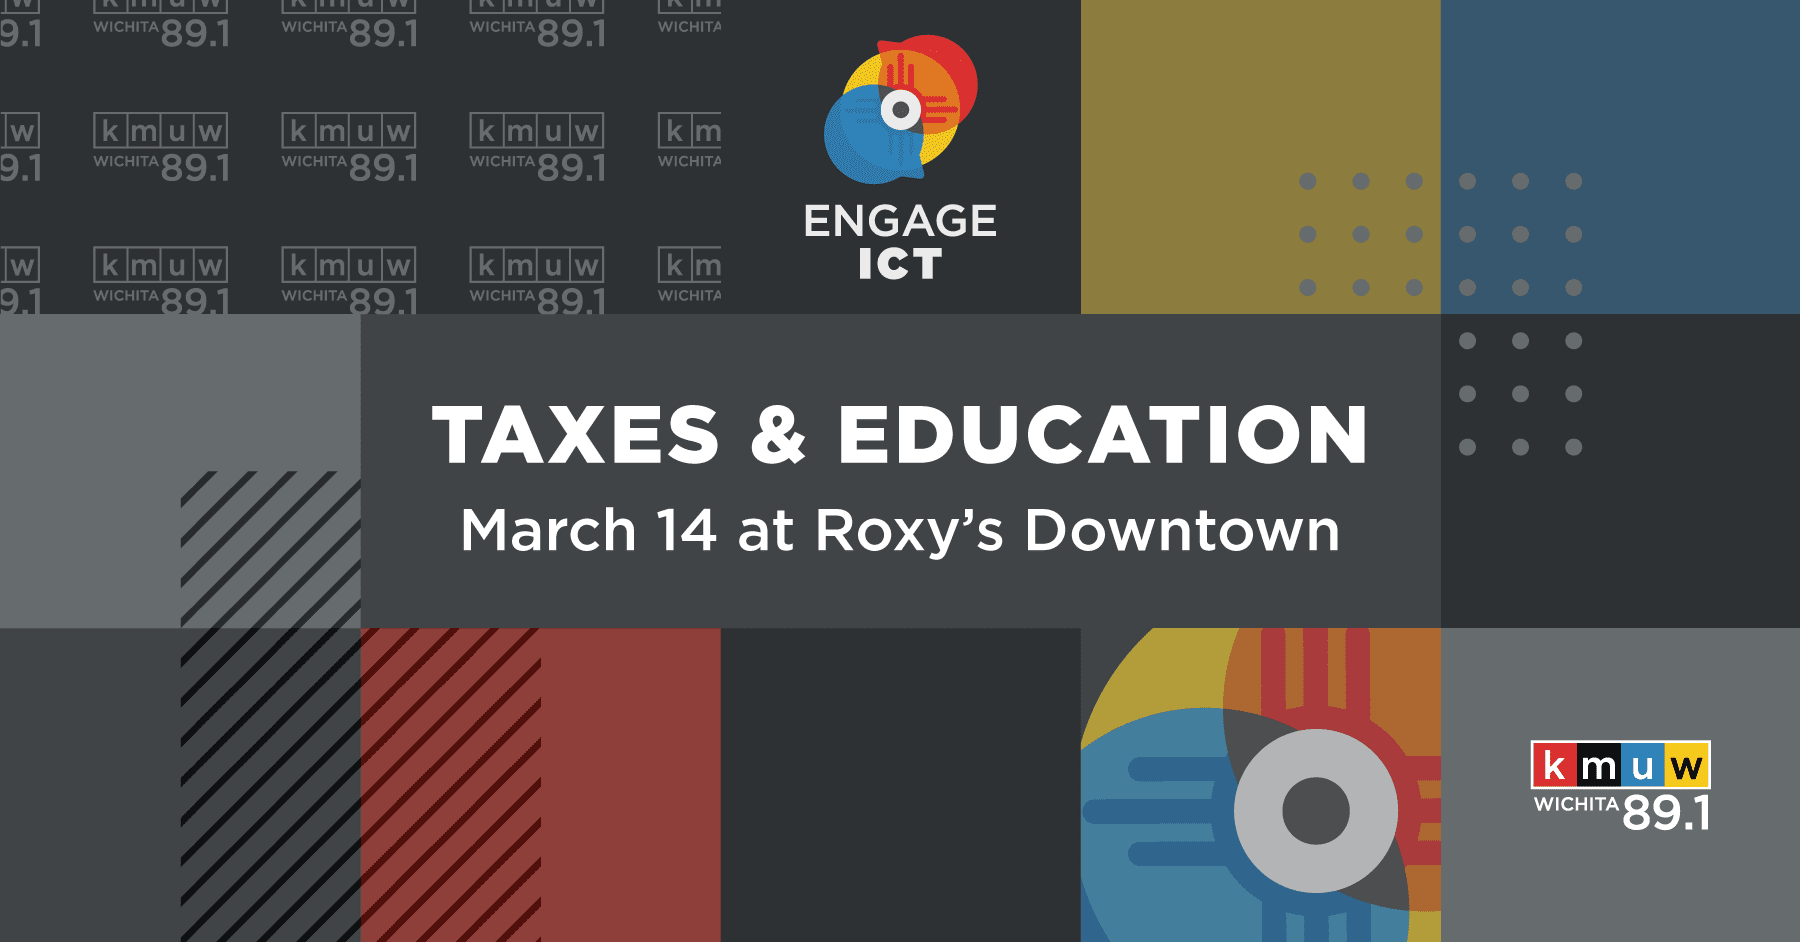 KMUW graphic with the text, "Engage ICT. Taxes & Education March 14 at Roxy's Downtown. KMUW Wichita 89.1."